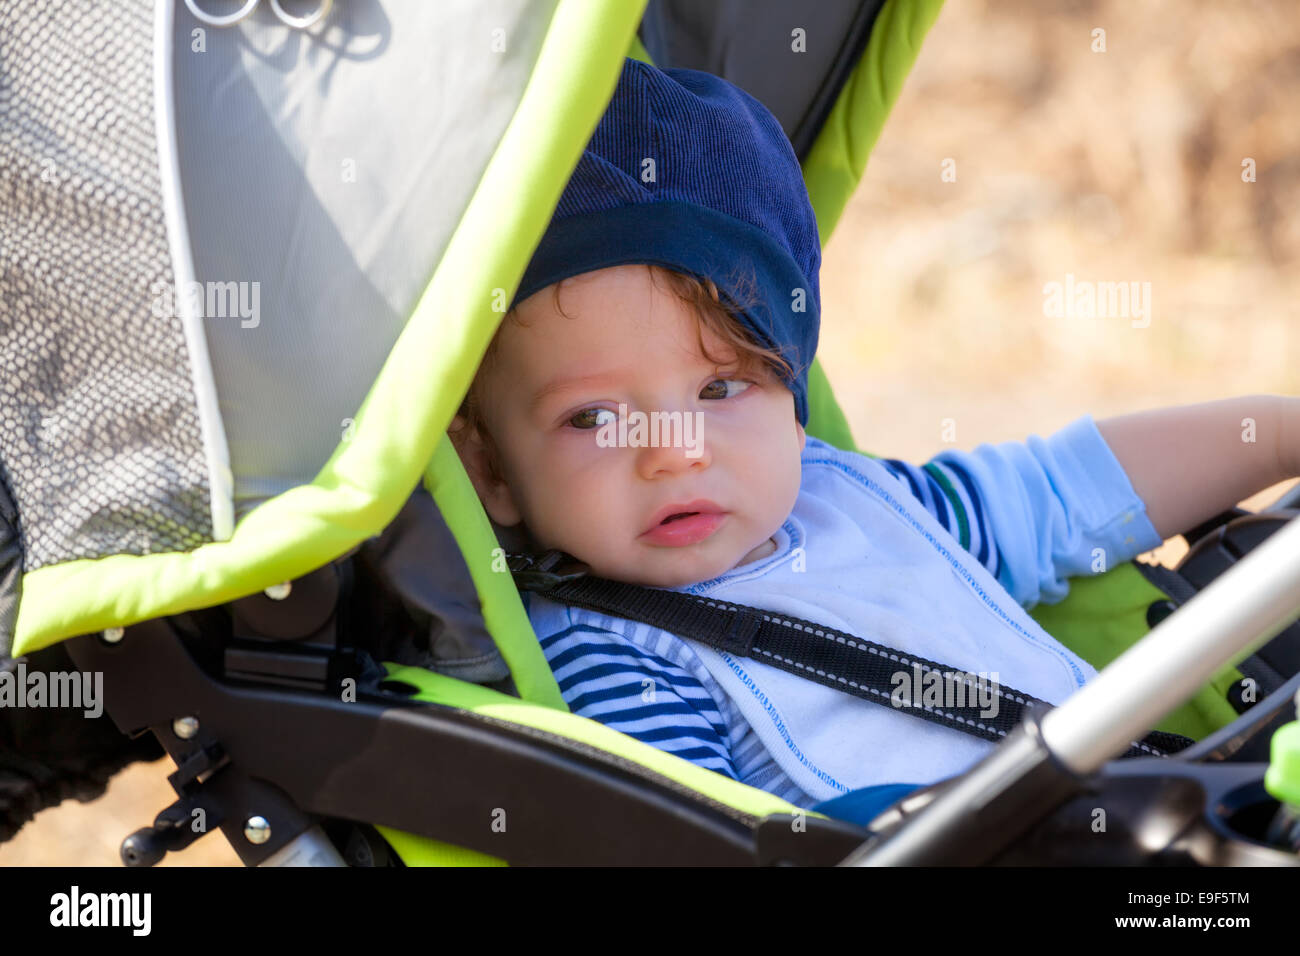 Baby boy out for fresh air in stroller. Stock Photo